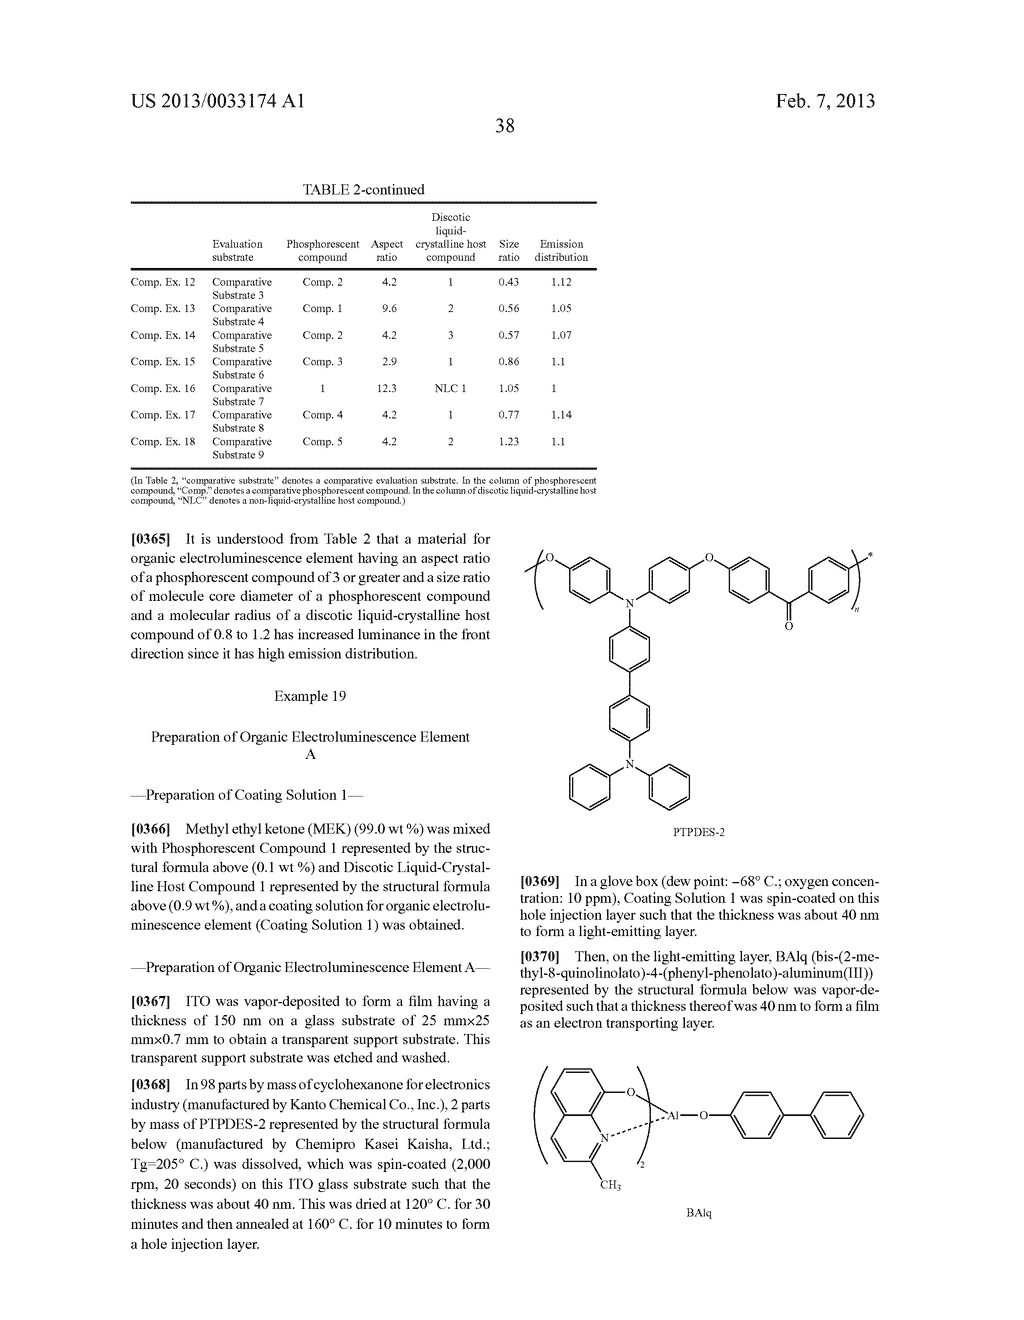 MATERIAL FOR ORGANIC ELECTROLUMINESCENCE ELEMENT AND ORGANIC     ELECTROLUMINESCENCE ELEMENT USING THE SAME, AND METHOD FOR MANUFACTURING     ORGANIC ELECTROLUMINESCENCE ELEMENT - diagram, schematic, and image 40